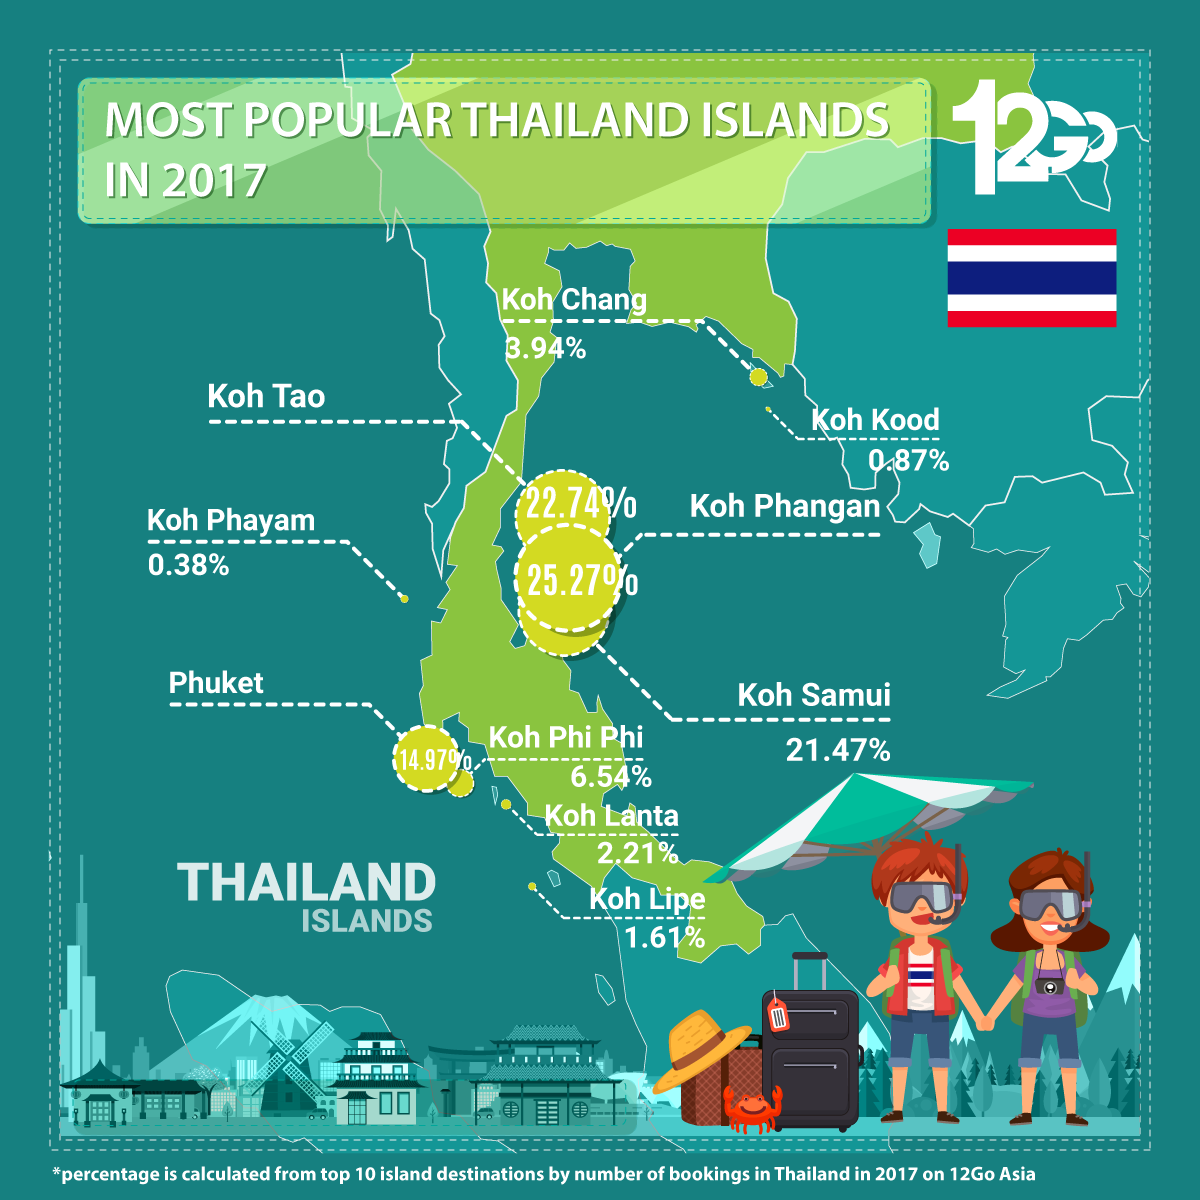 Most Popular Thailand Islands in 2017 Infographic